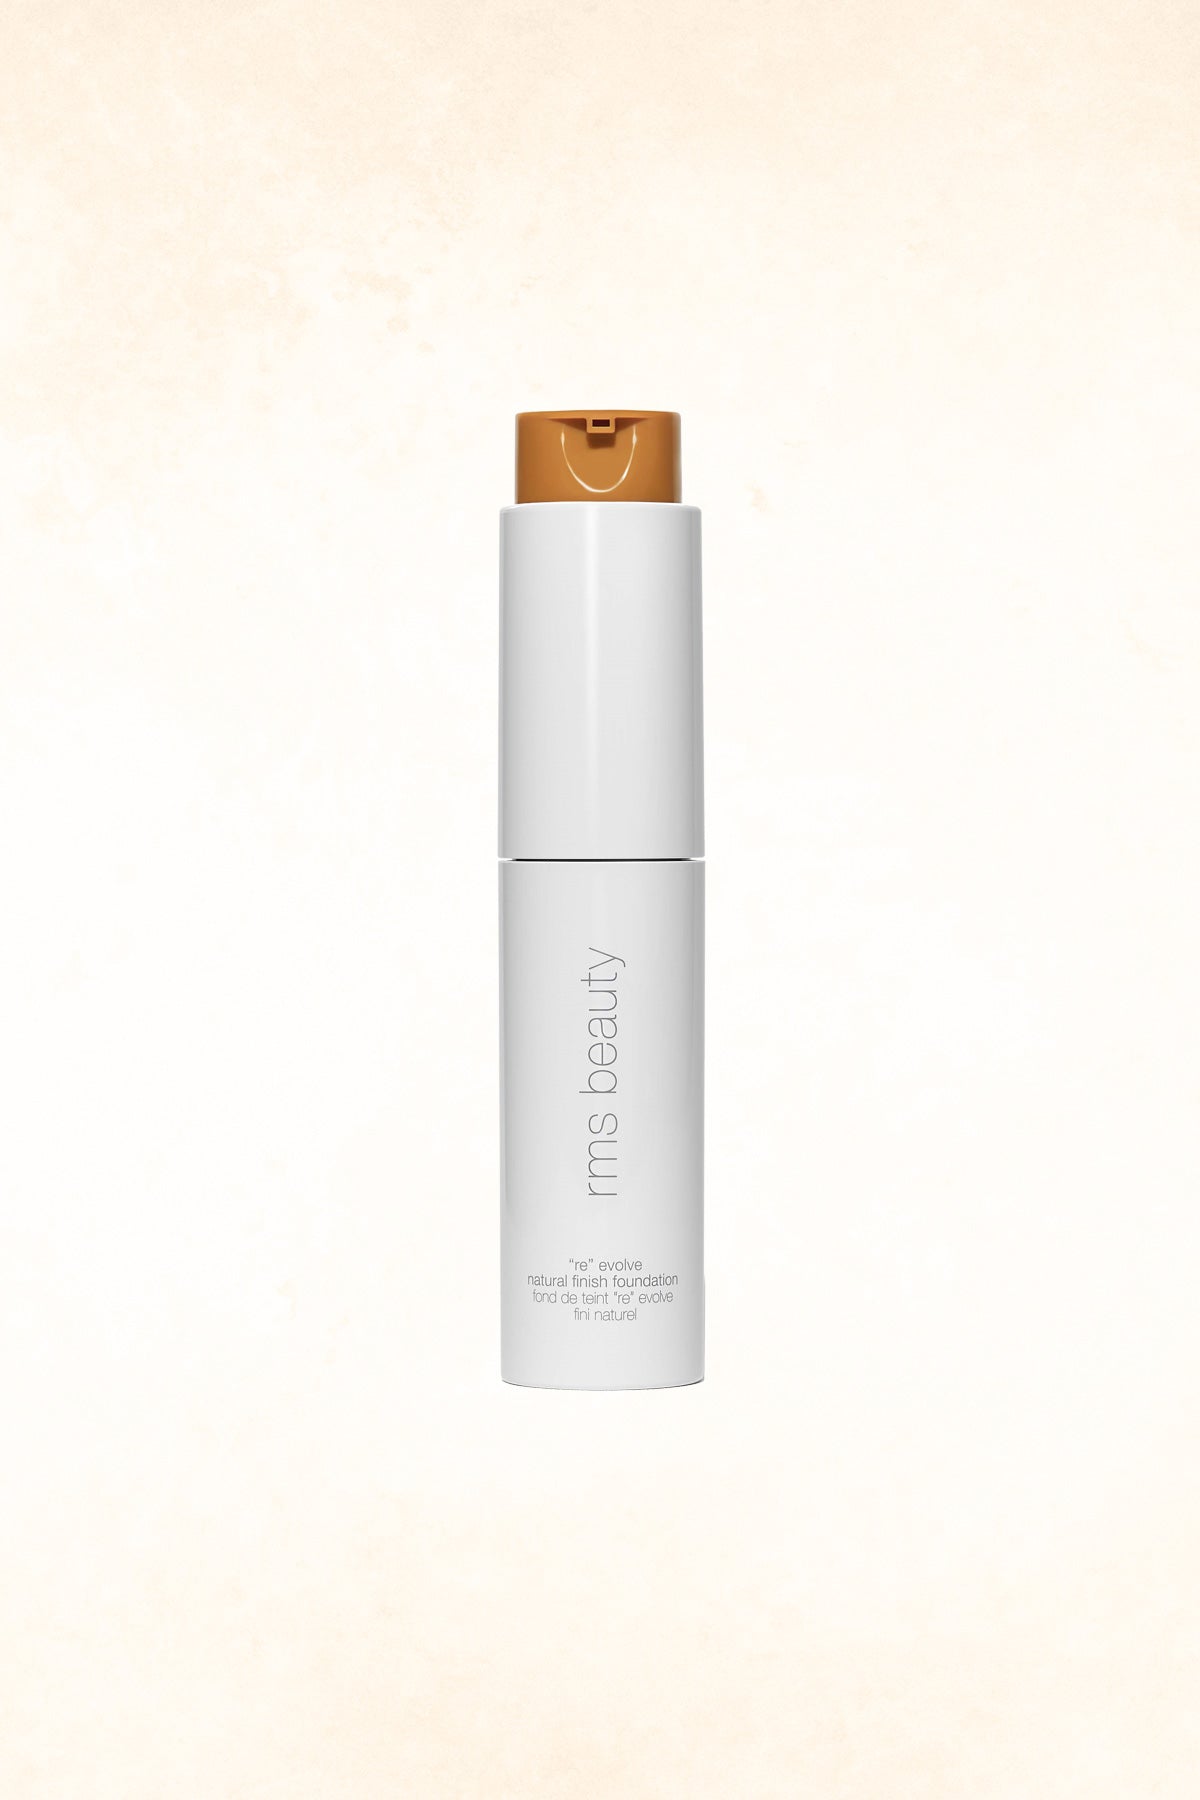 RMS Beauty – &quot;Re&quot; Evolve Natural Finish Foundation - 66